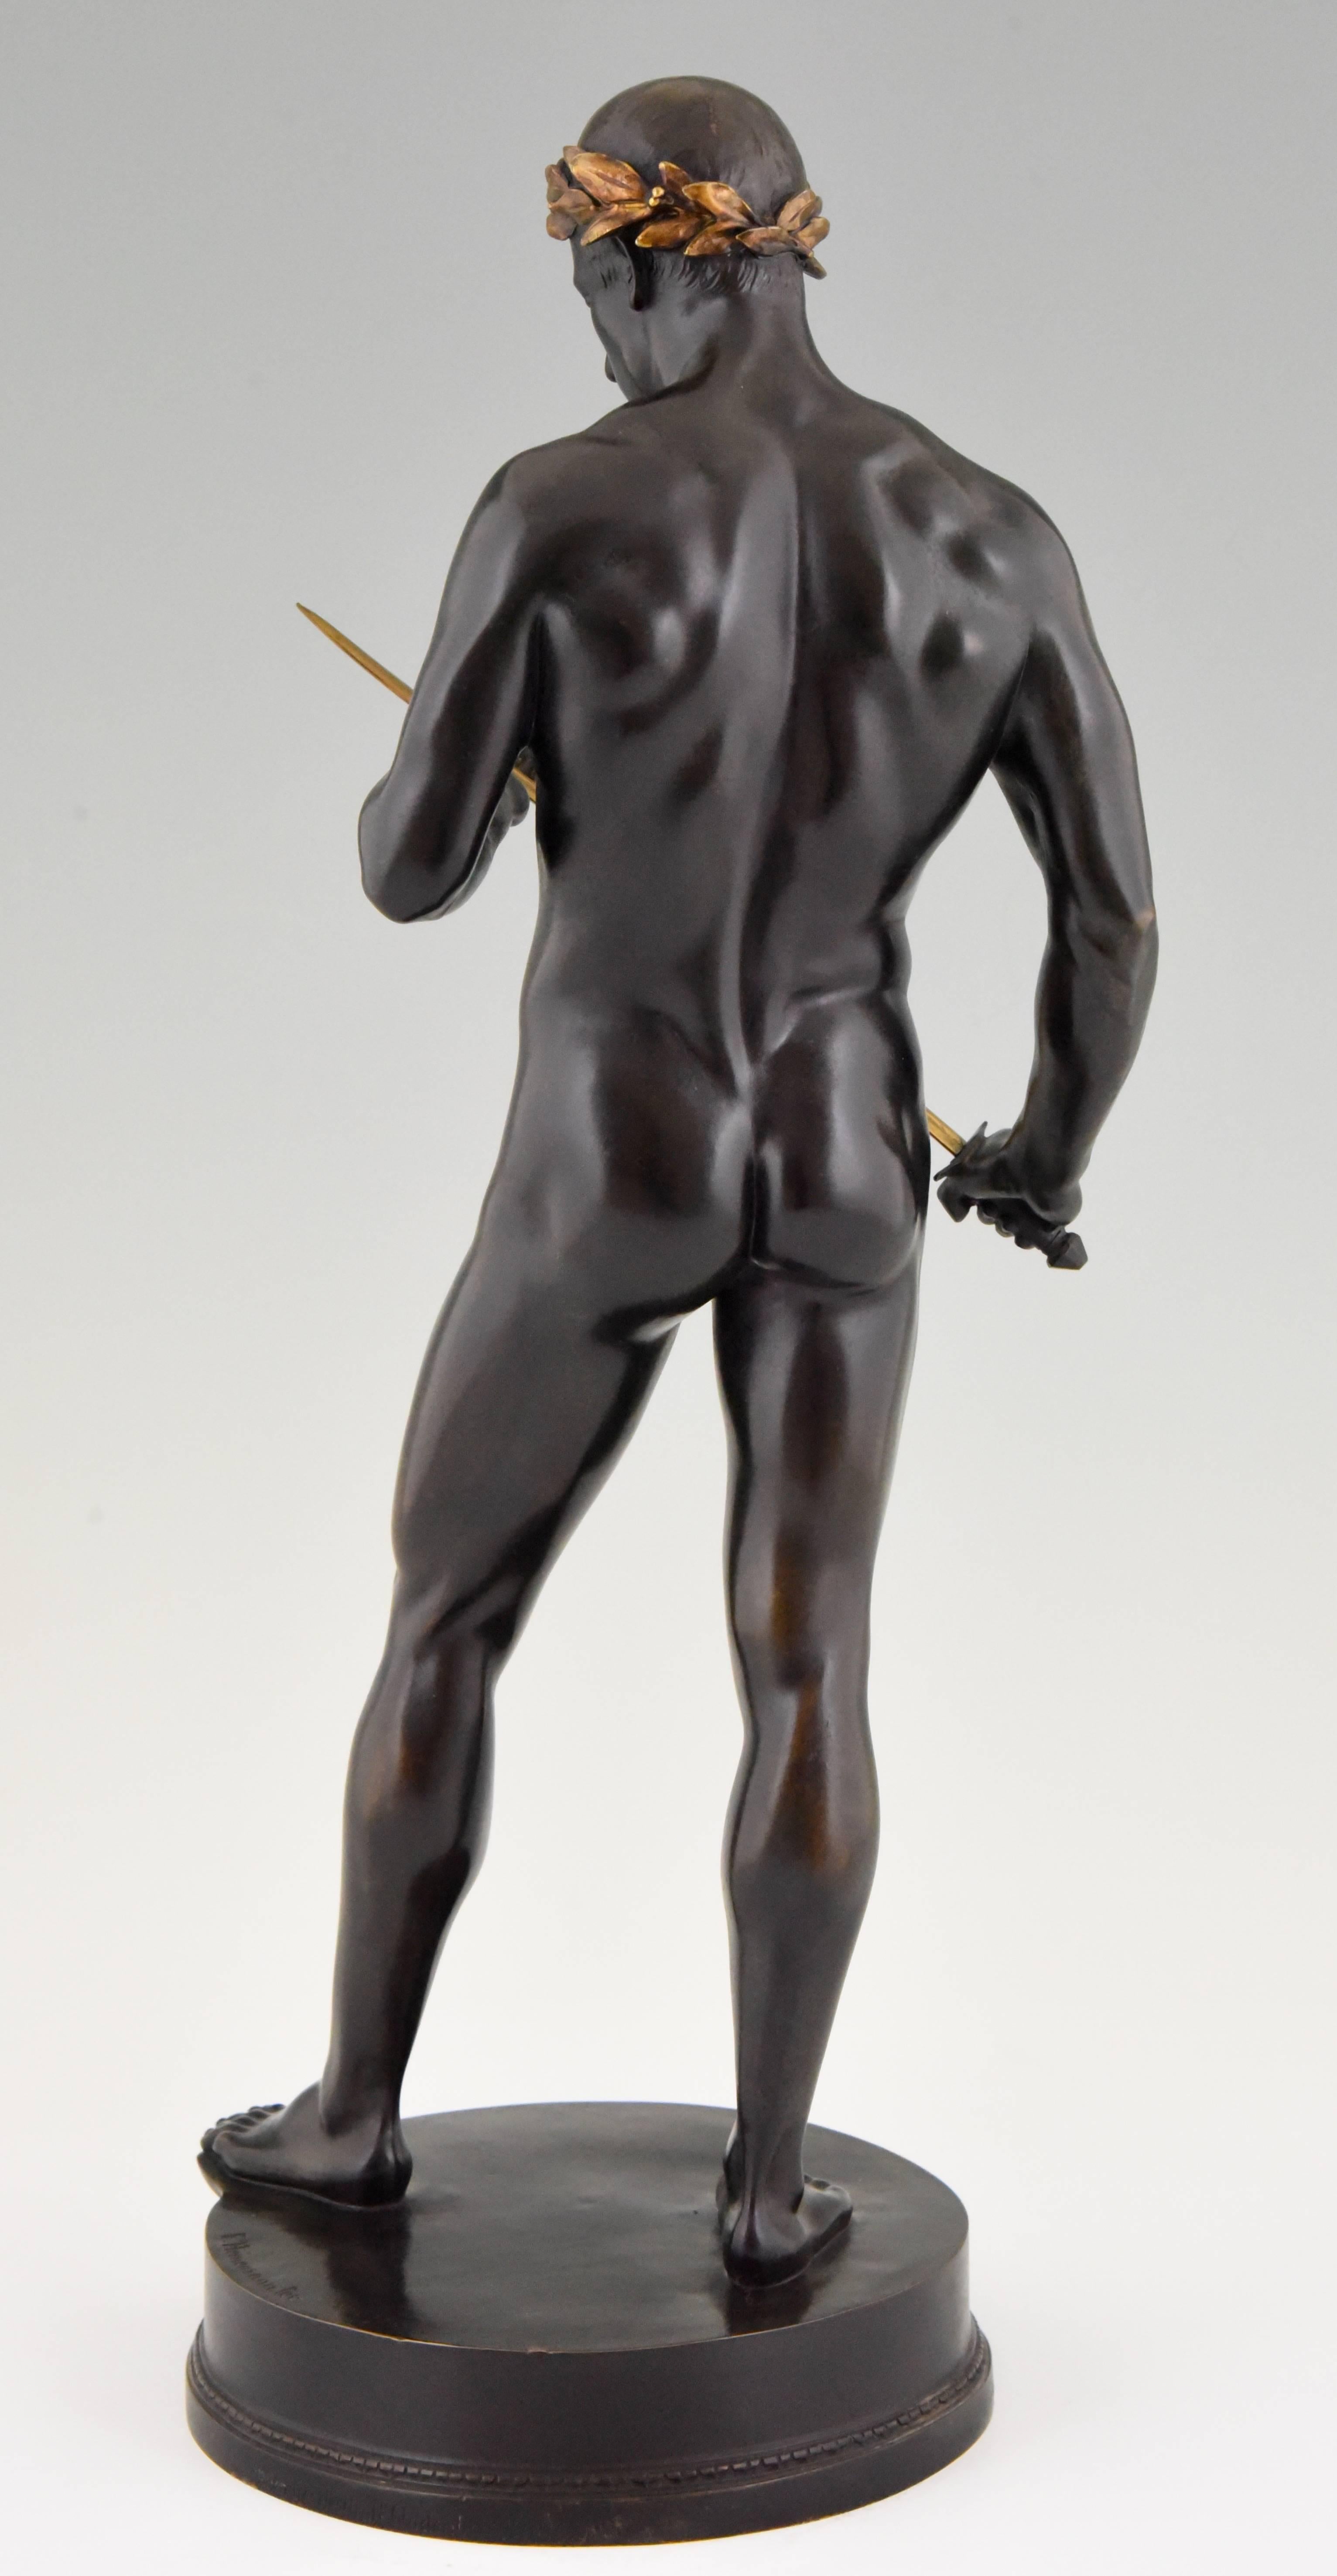 Neoclassical Antique Bronze Sculpture Male Nude with Sword by Fritz Heinemann, 1890